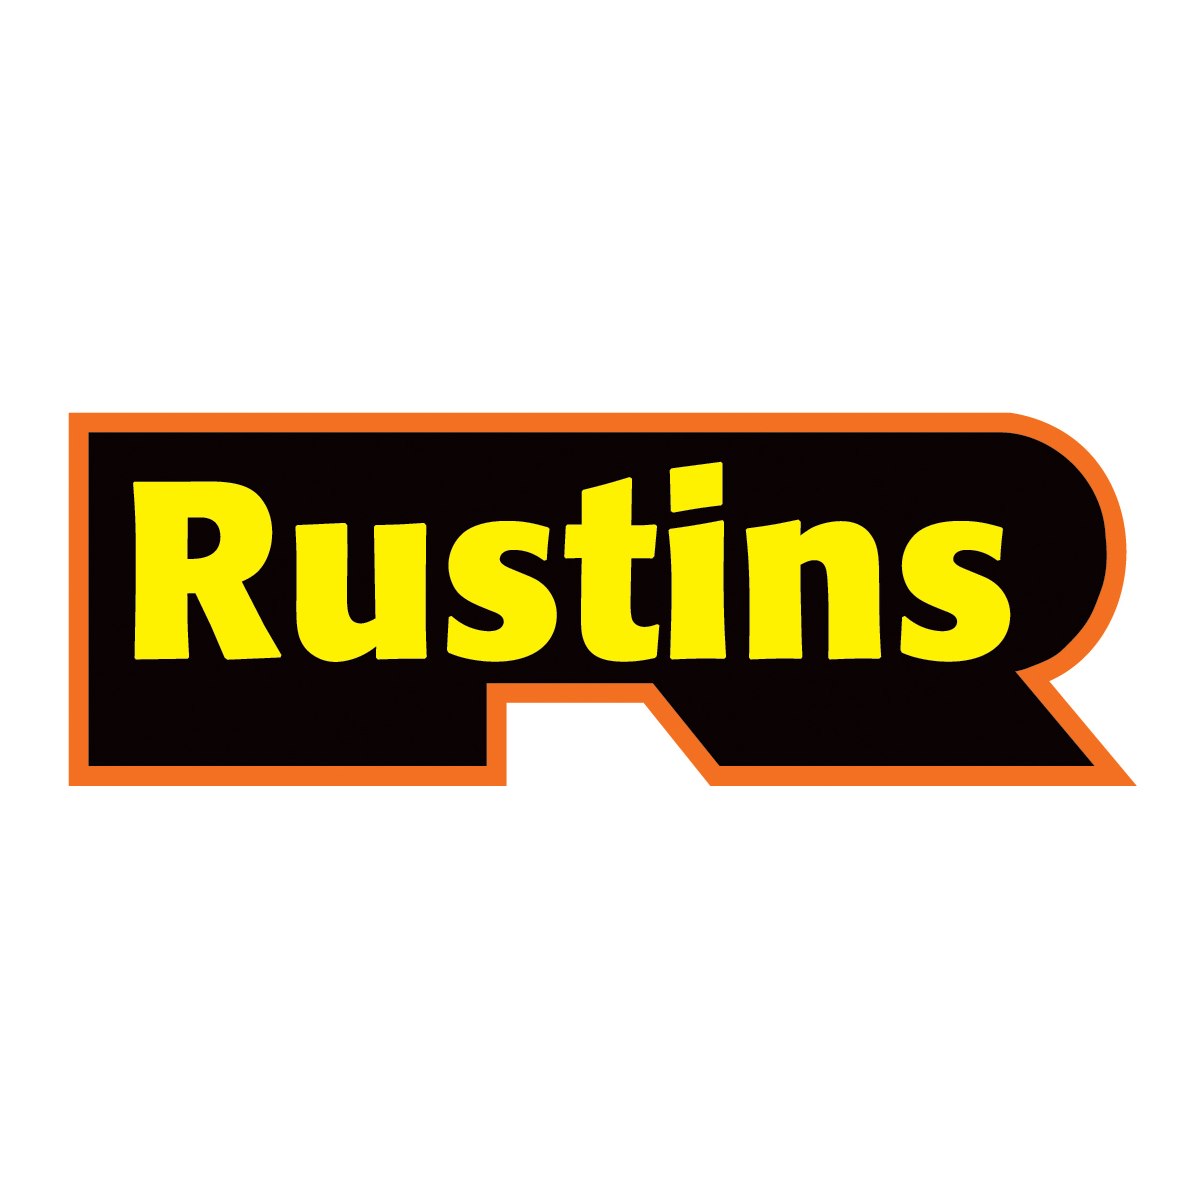 Where to Buy Rustins Products